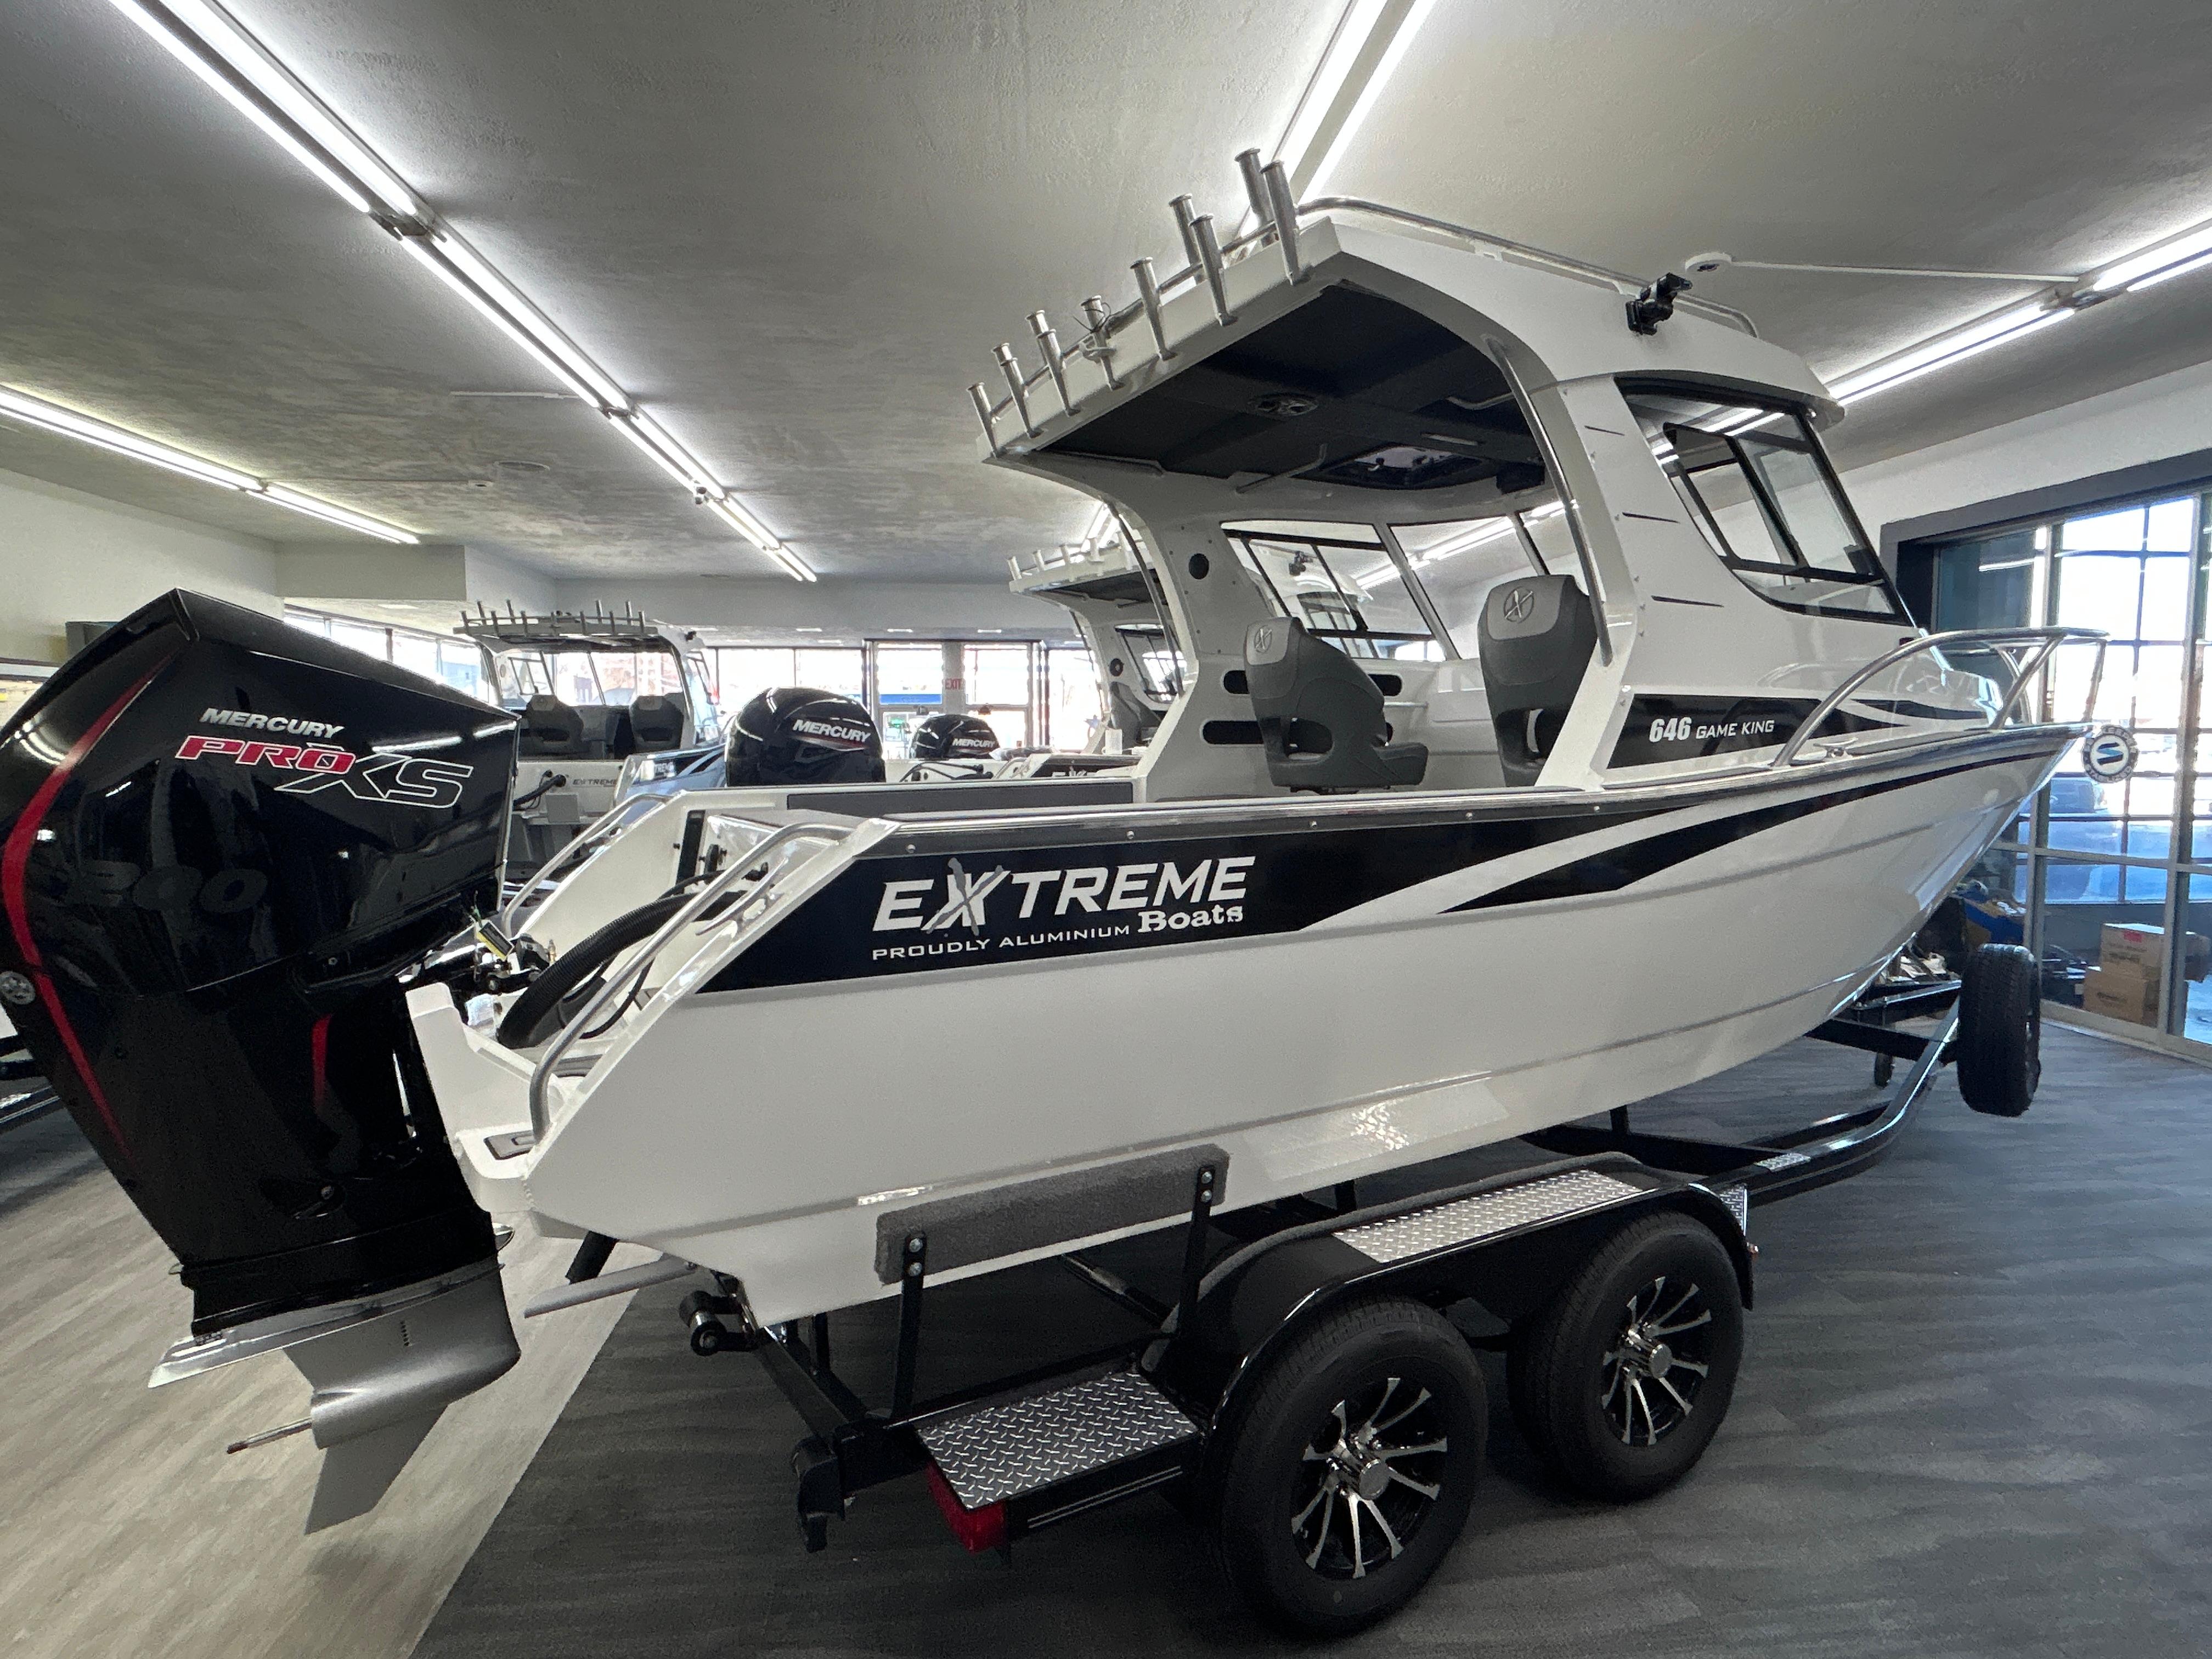 2024 Extreme Boats 646 Game King Aluminium Fish for sale - YachtWorld